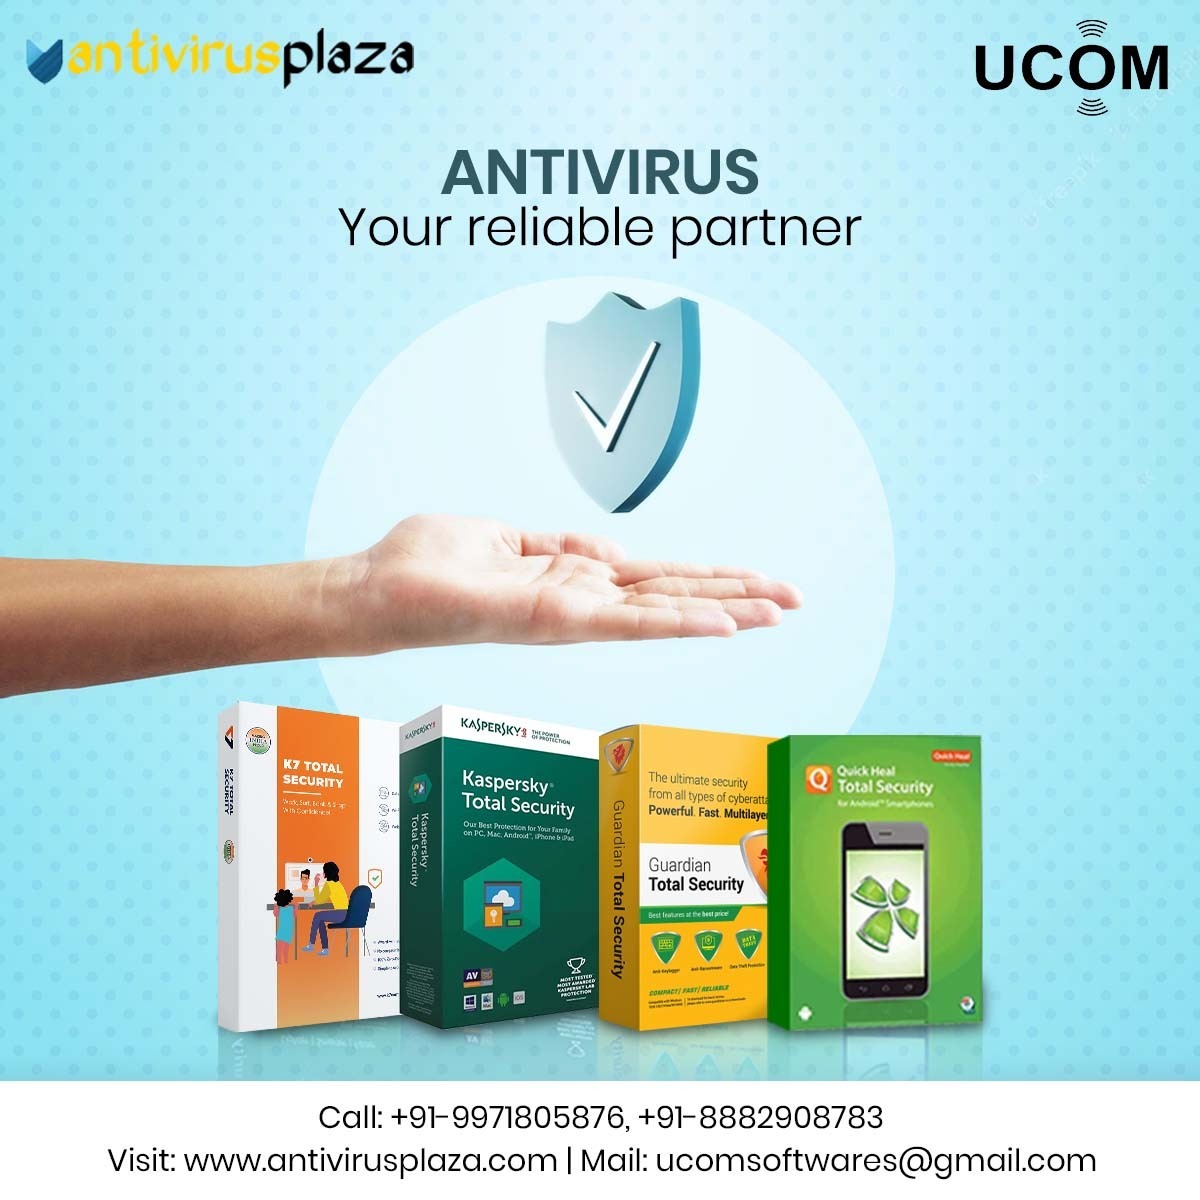 Antivirus: Your reliable partner in the ever-evolving digital landscape. Count on us for robust protection and peace of mind. 

𝐂𝐚𝐥𝐥: +91-99718 05876
𝐕𝐢𝐬𝐢𝐭 𝐔𝐬: antivirusplaza.com

#AntivirusPlaza #InternetSecurity #MobileSecurity #OnlineProtection #StaySafeOnline